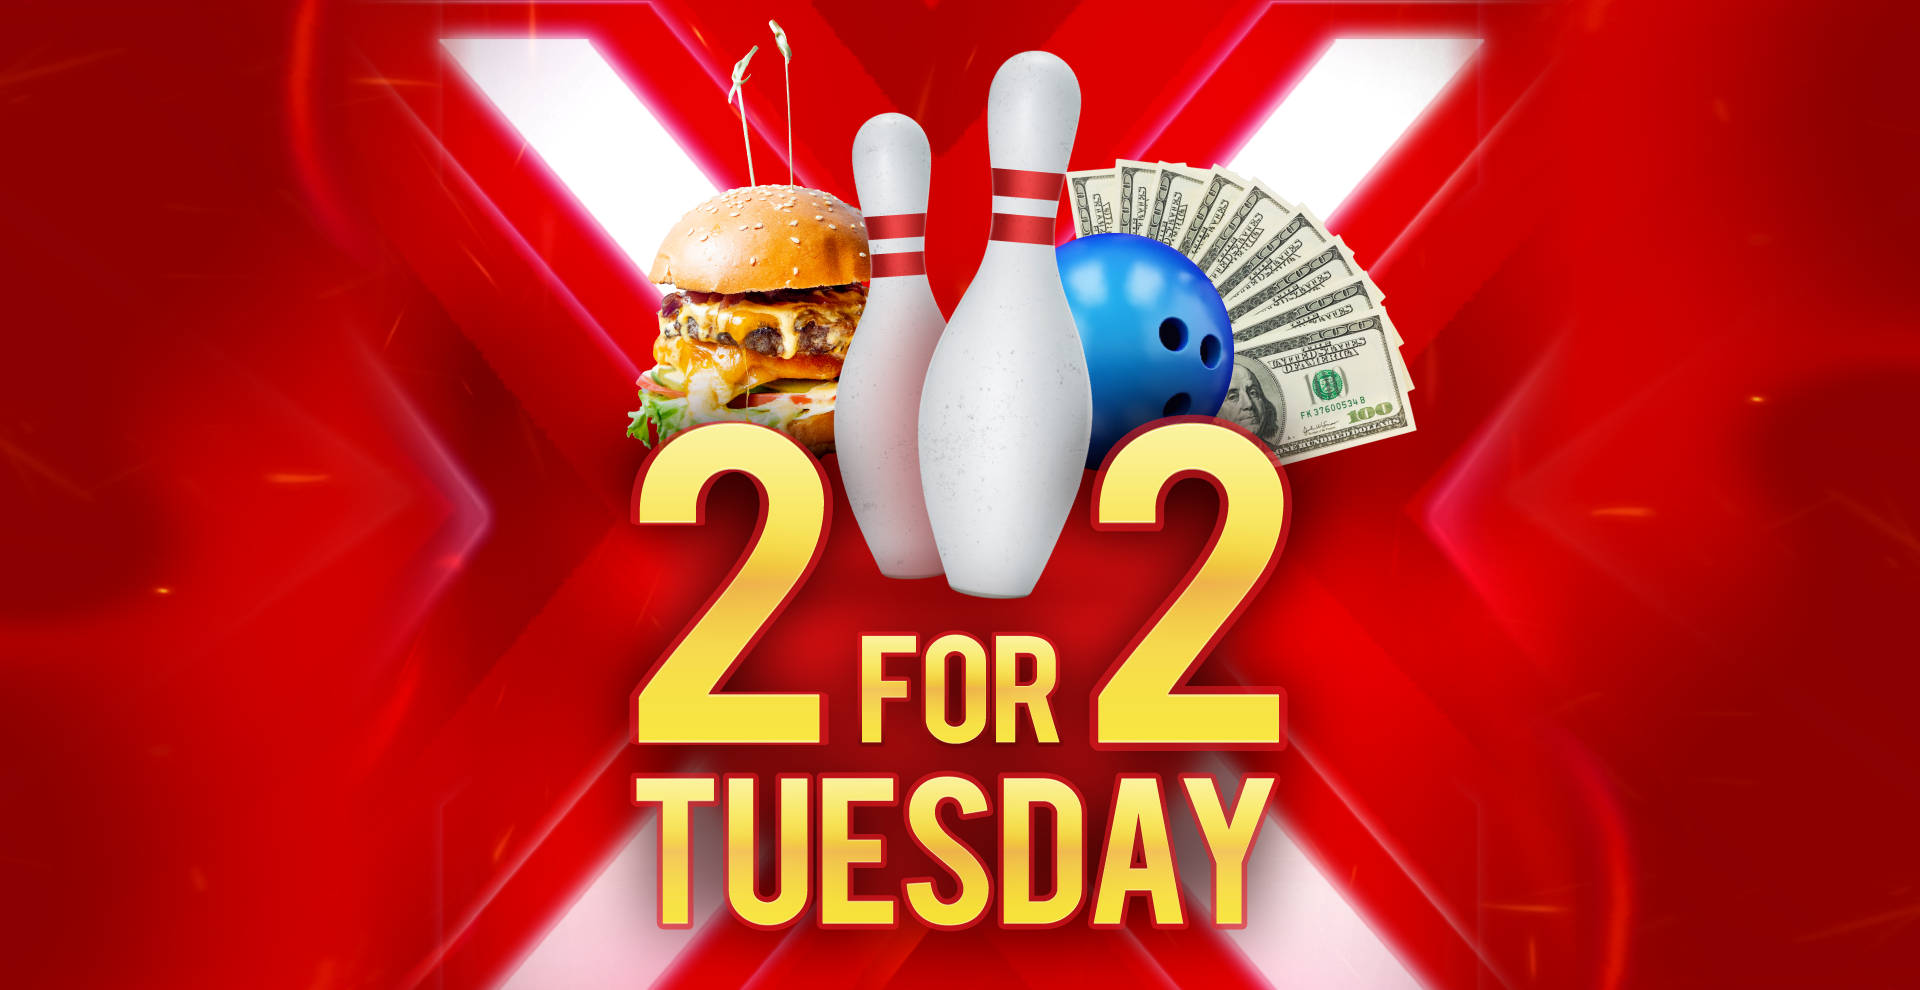 All Star Lanes & Casino | 2 for 2 Tuesday